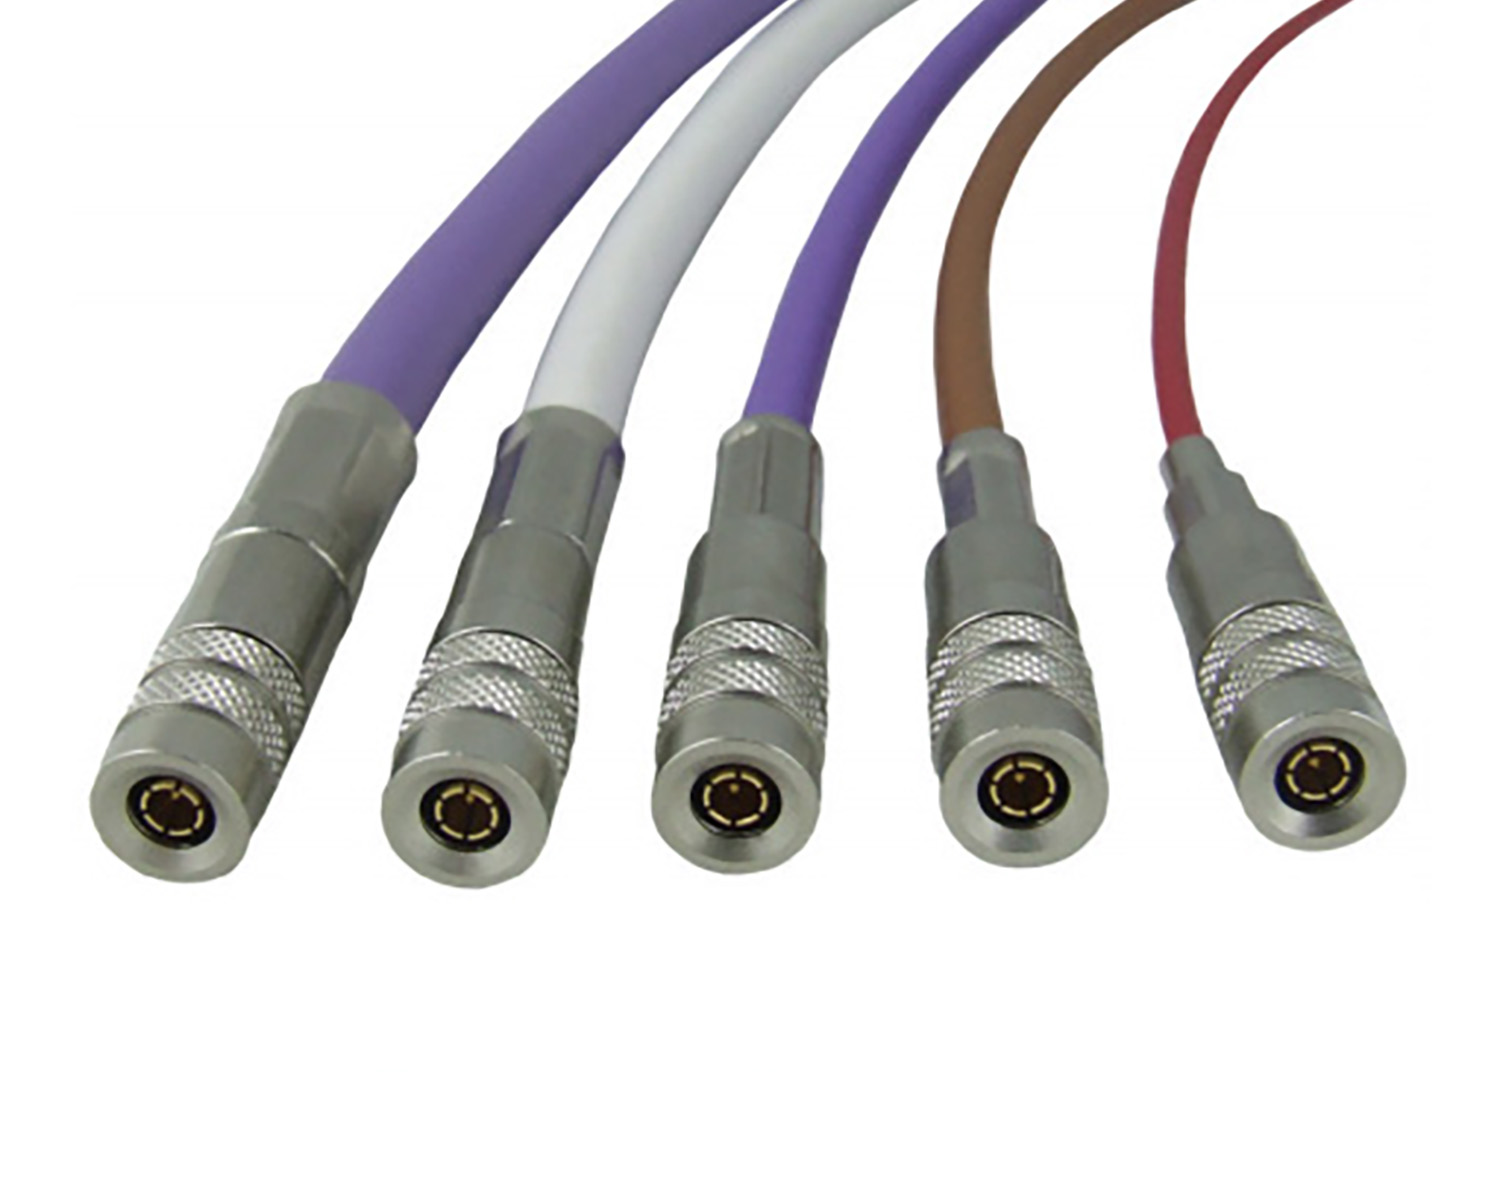 Kings Cable for audio video applications